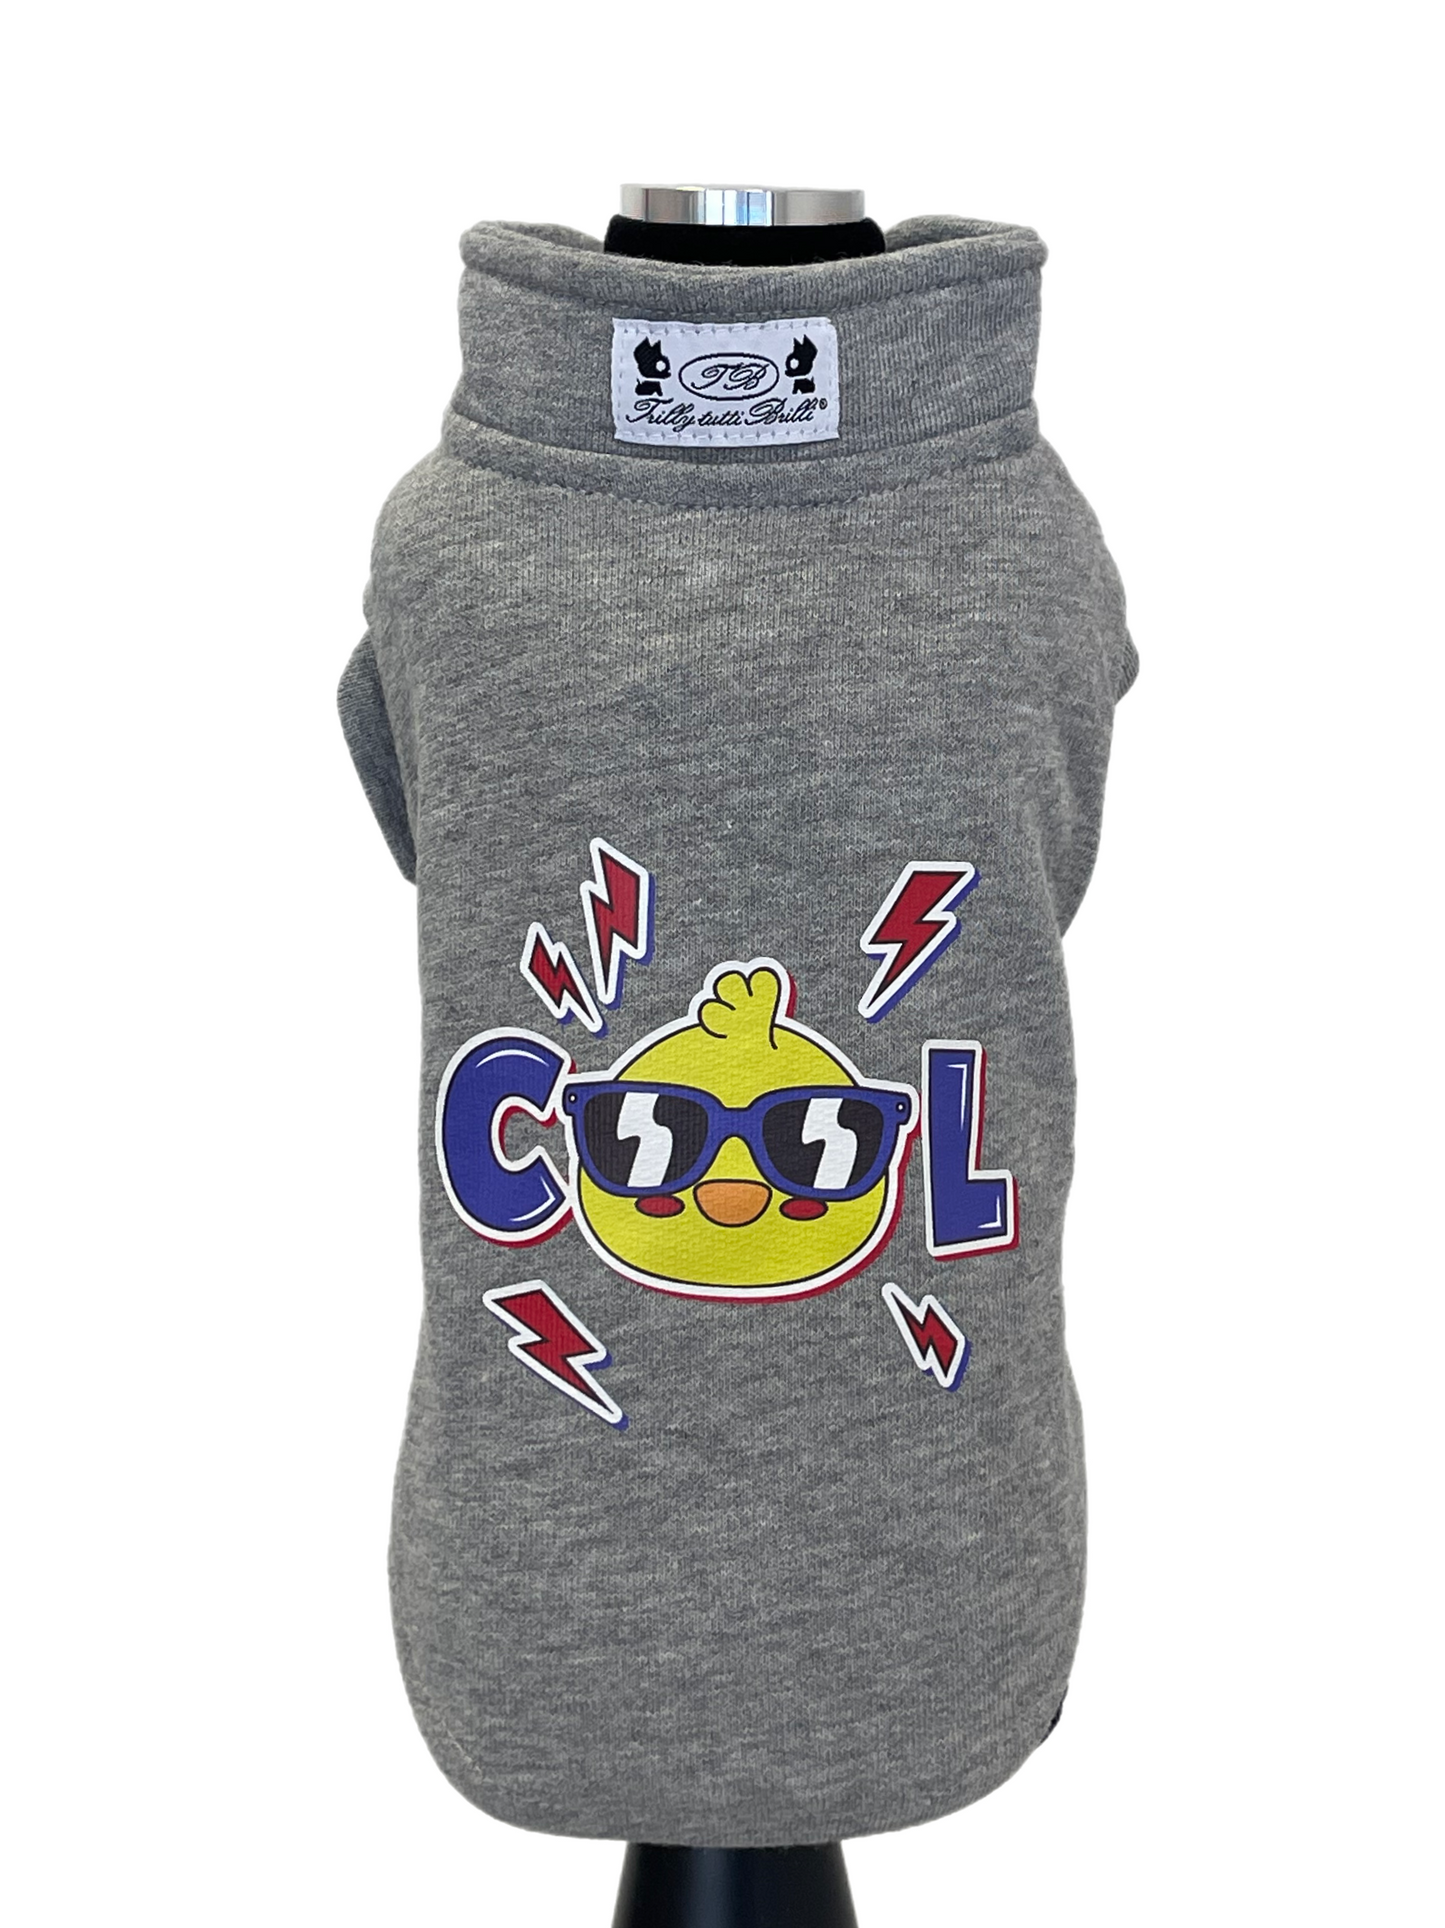 COOL sweatshirt. Luxury clothing for dogs 100% Made in Italy.